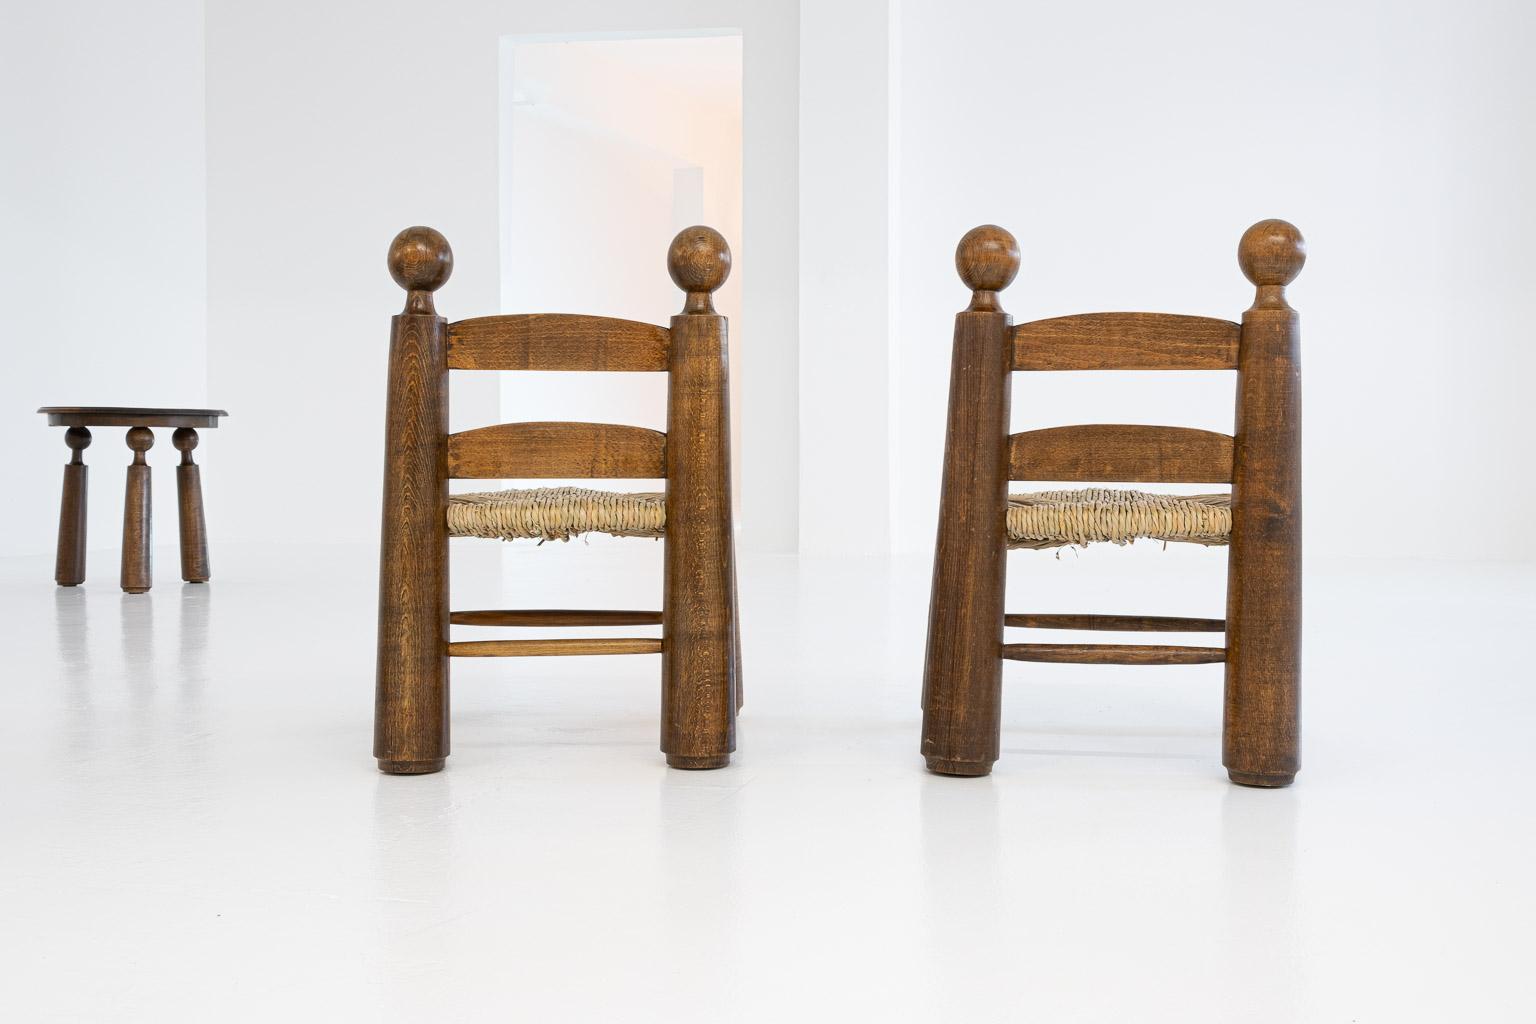 Straw Modern Rustic, Brutalistic Table / Chair Set by Charles Dudouyt, France, 1940s For Sale